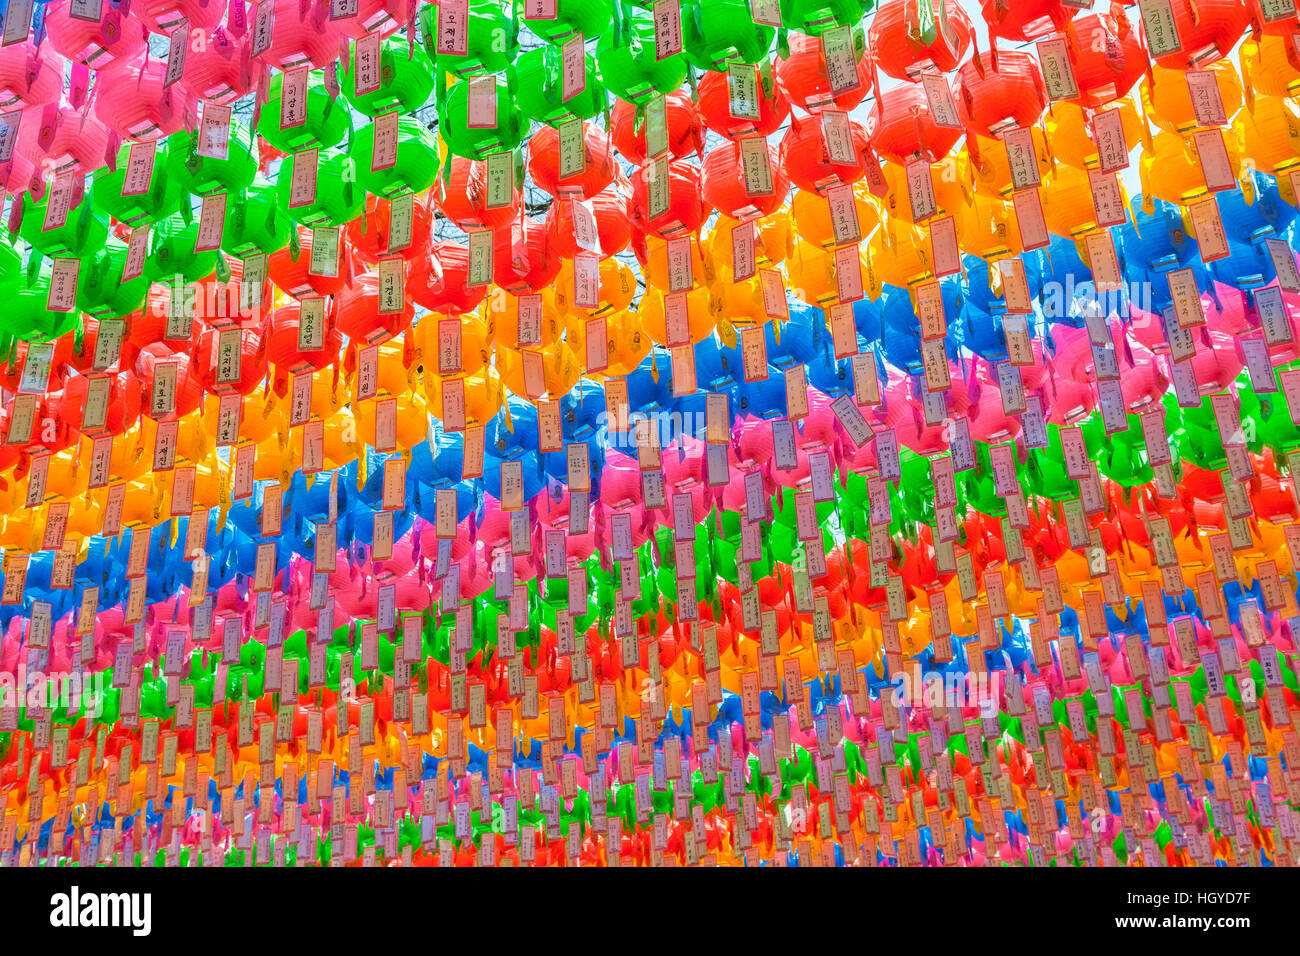 Colorful paper lanterns viewed from below at Jogyesa Temple in Seoul, South Korea. Lanterns are set for Lotus Lantern Festival. Stock Photo